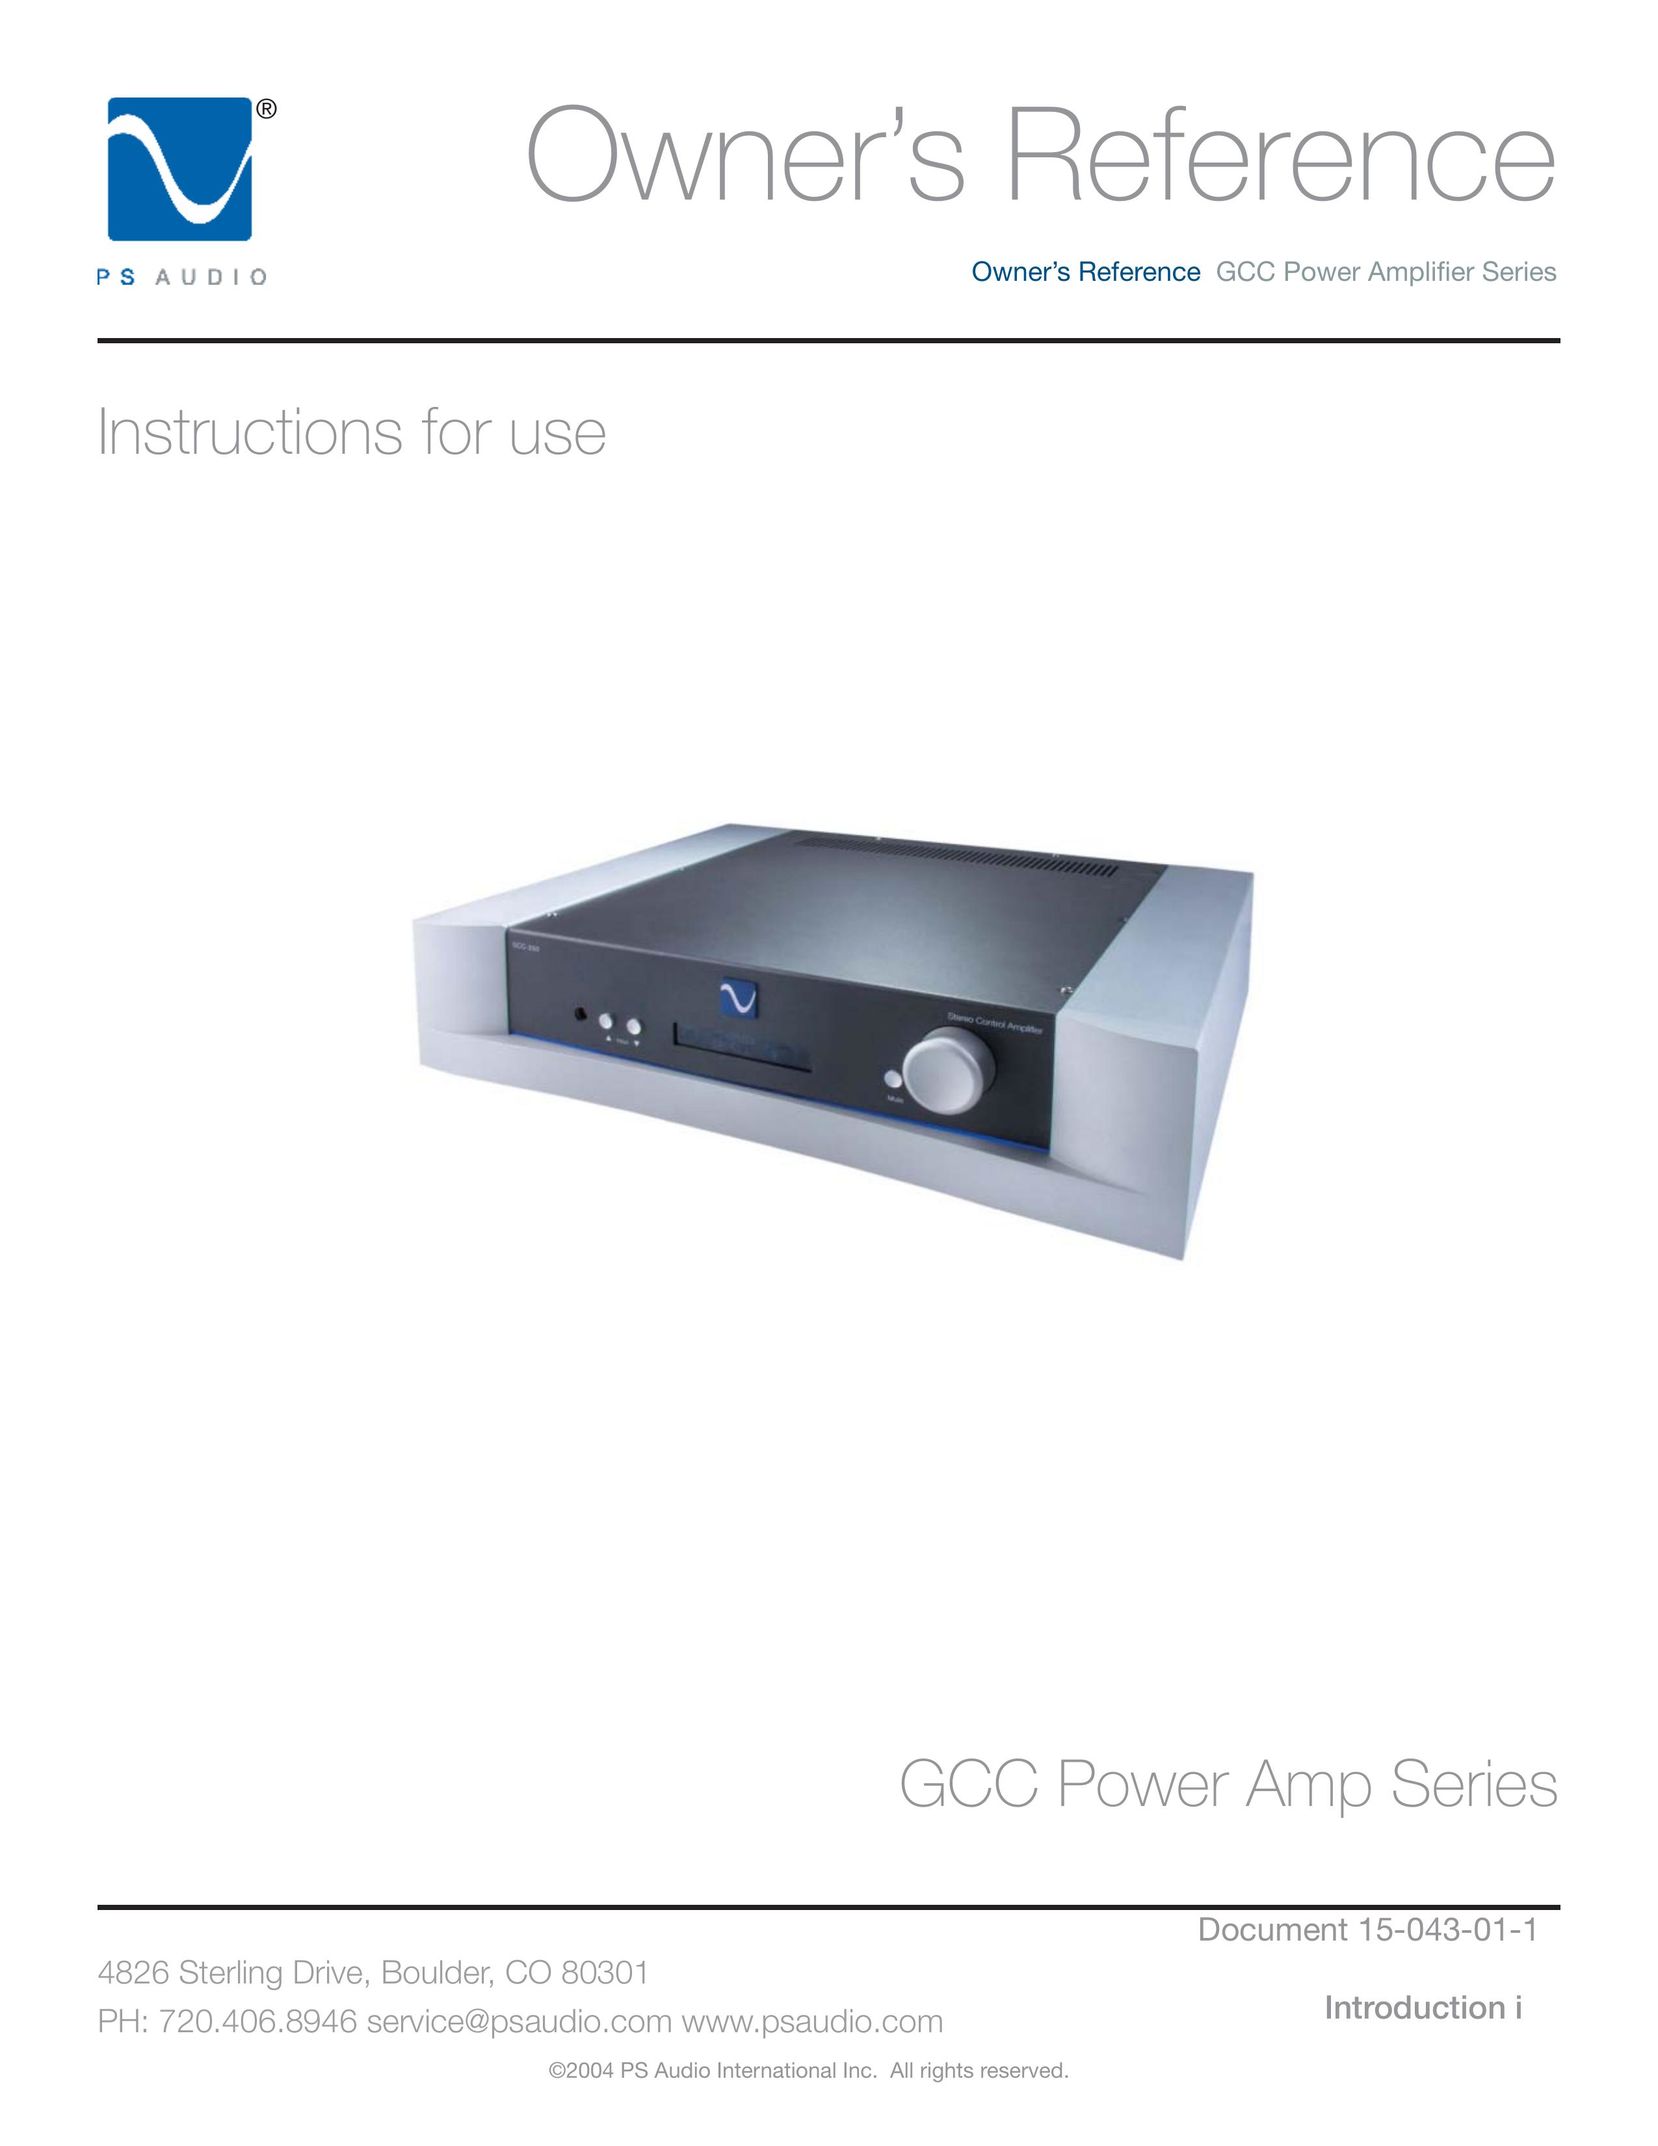 PS Audio GCC-250 Stereo Amplifier User Manual